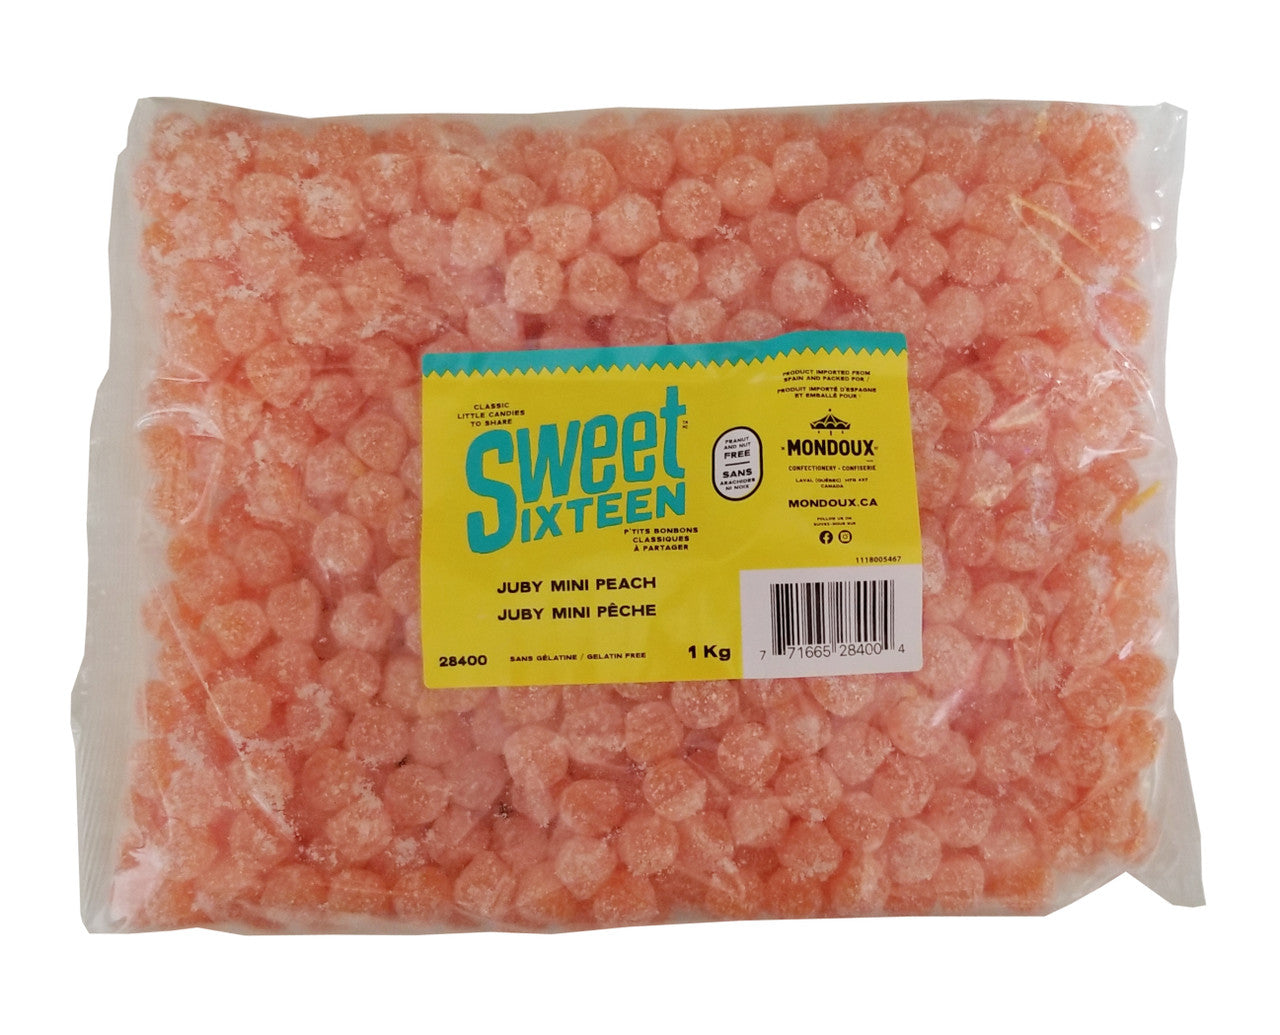 Mondoux Sweet Sixteen Juby Mini Peach, 1kg/2.2 lbs., {Imported from Canada}